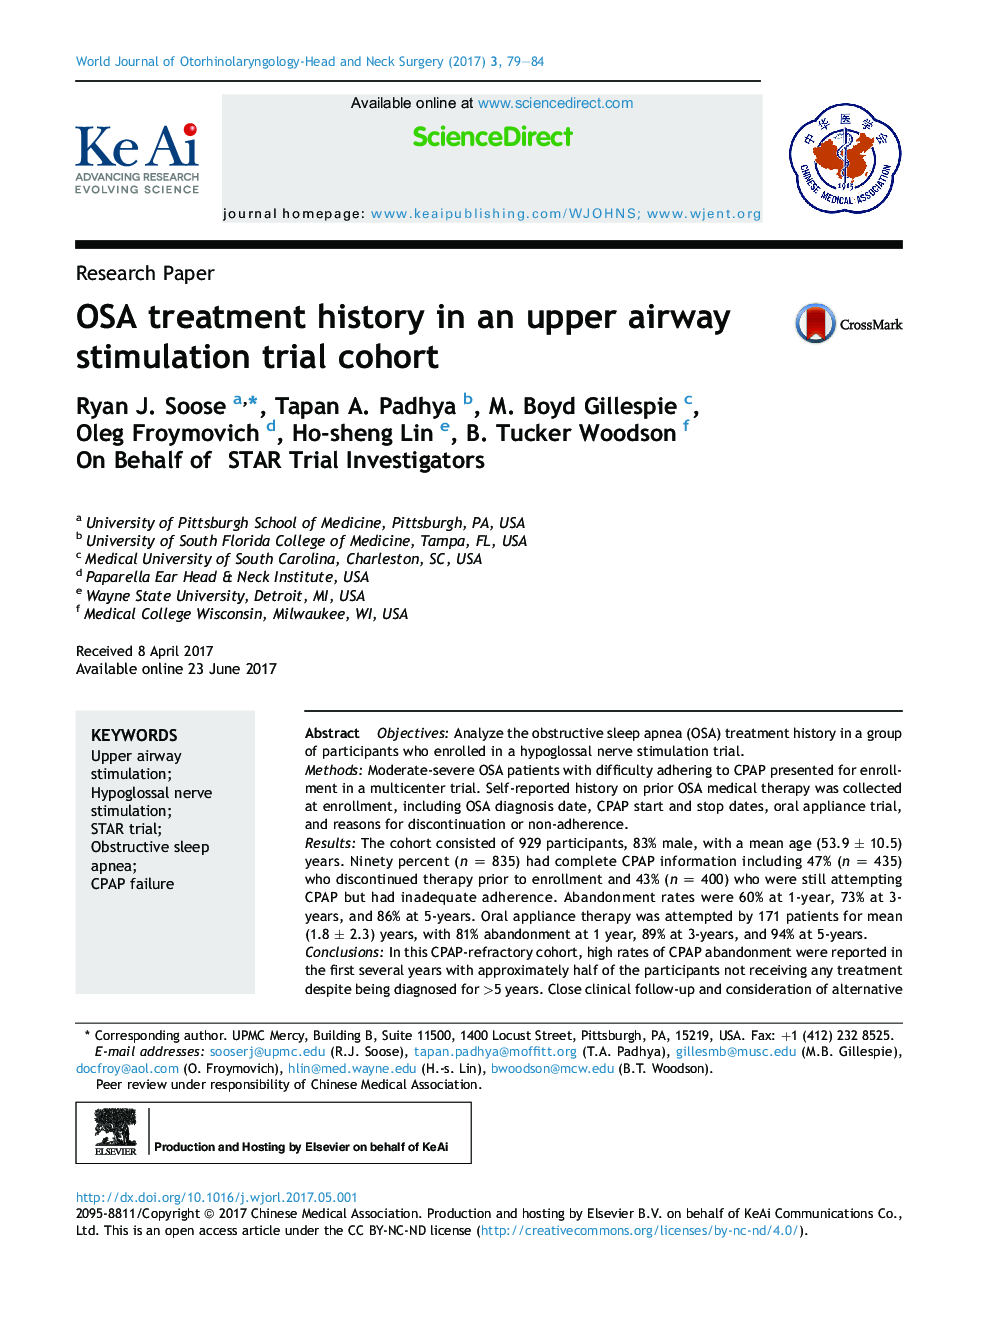 OSA treatment history in an upper airway stimulation trial cohort